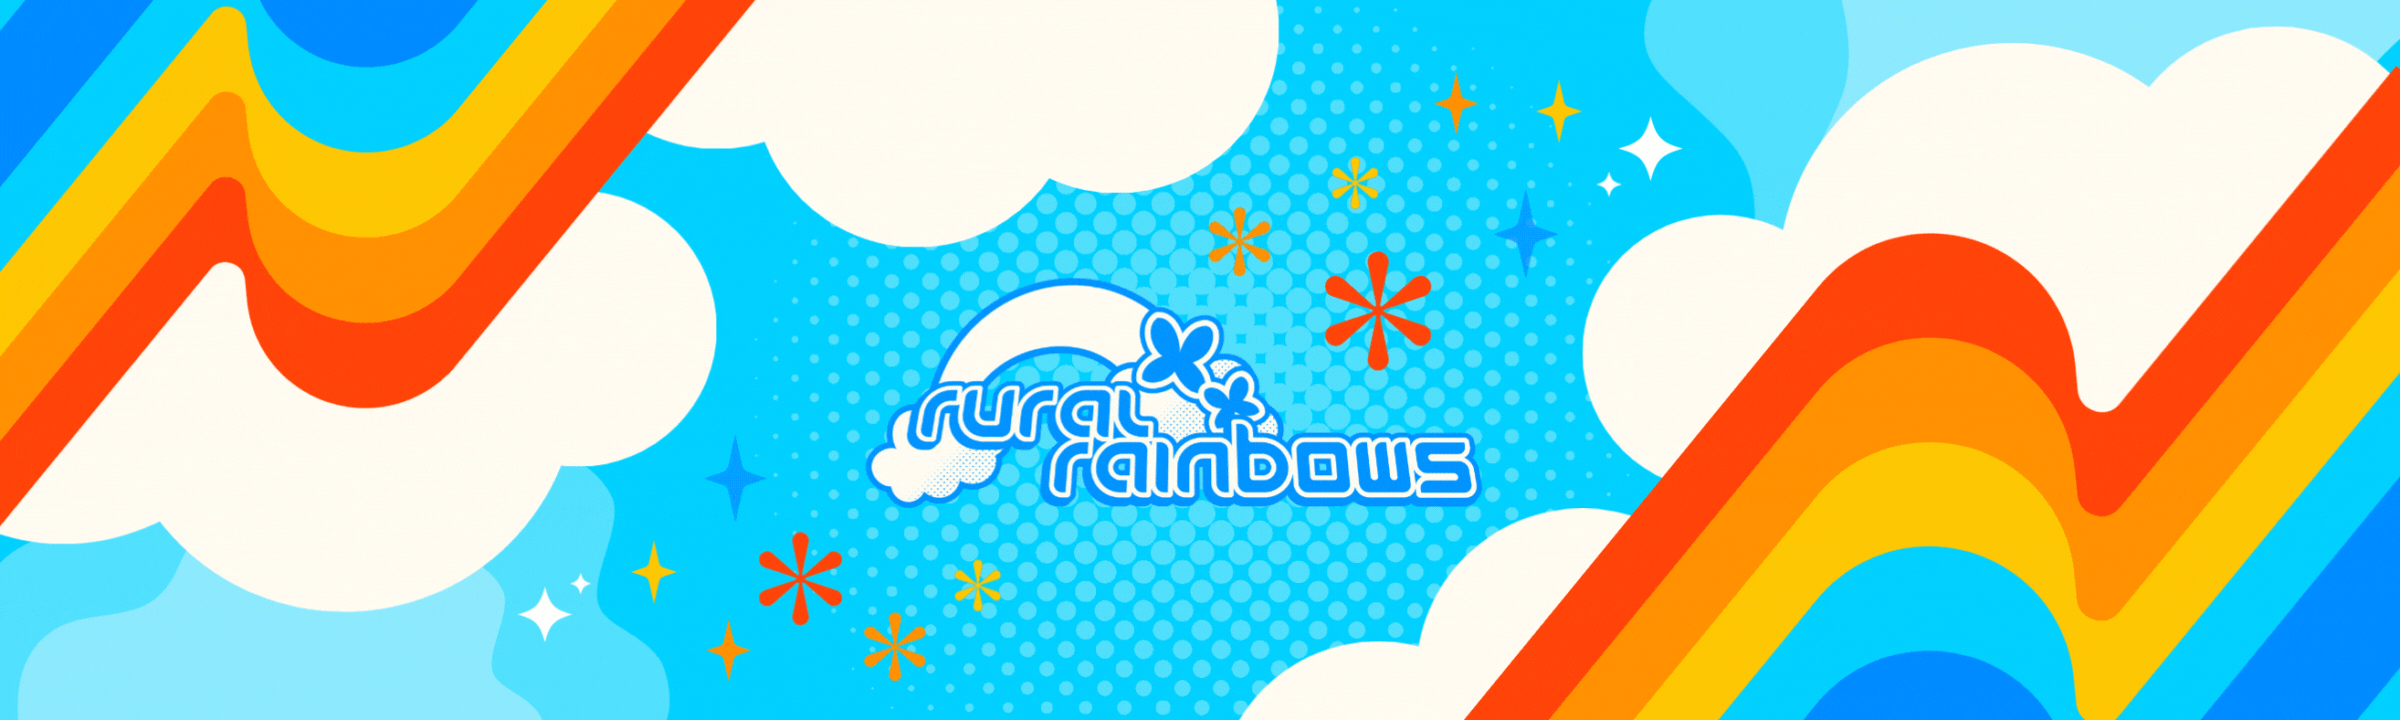 Animated logo gif of Ruralrainbows surrounded by clouds and spinning red, orange, and yellow flowers